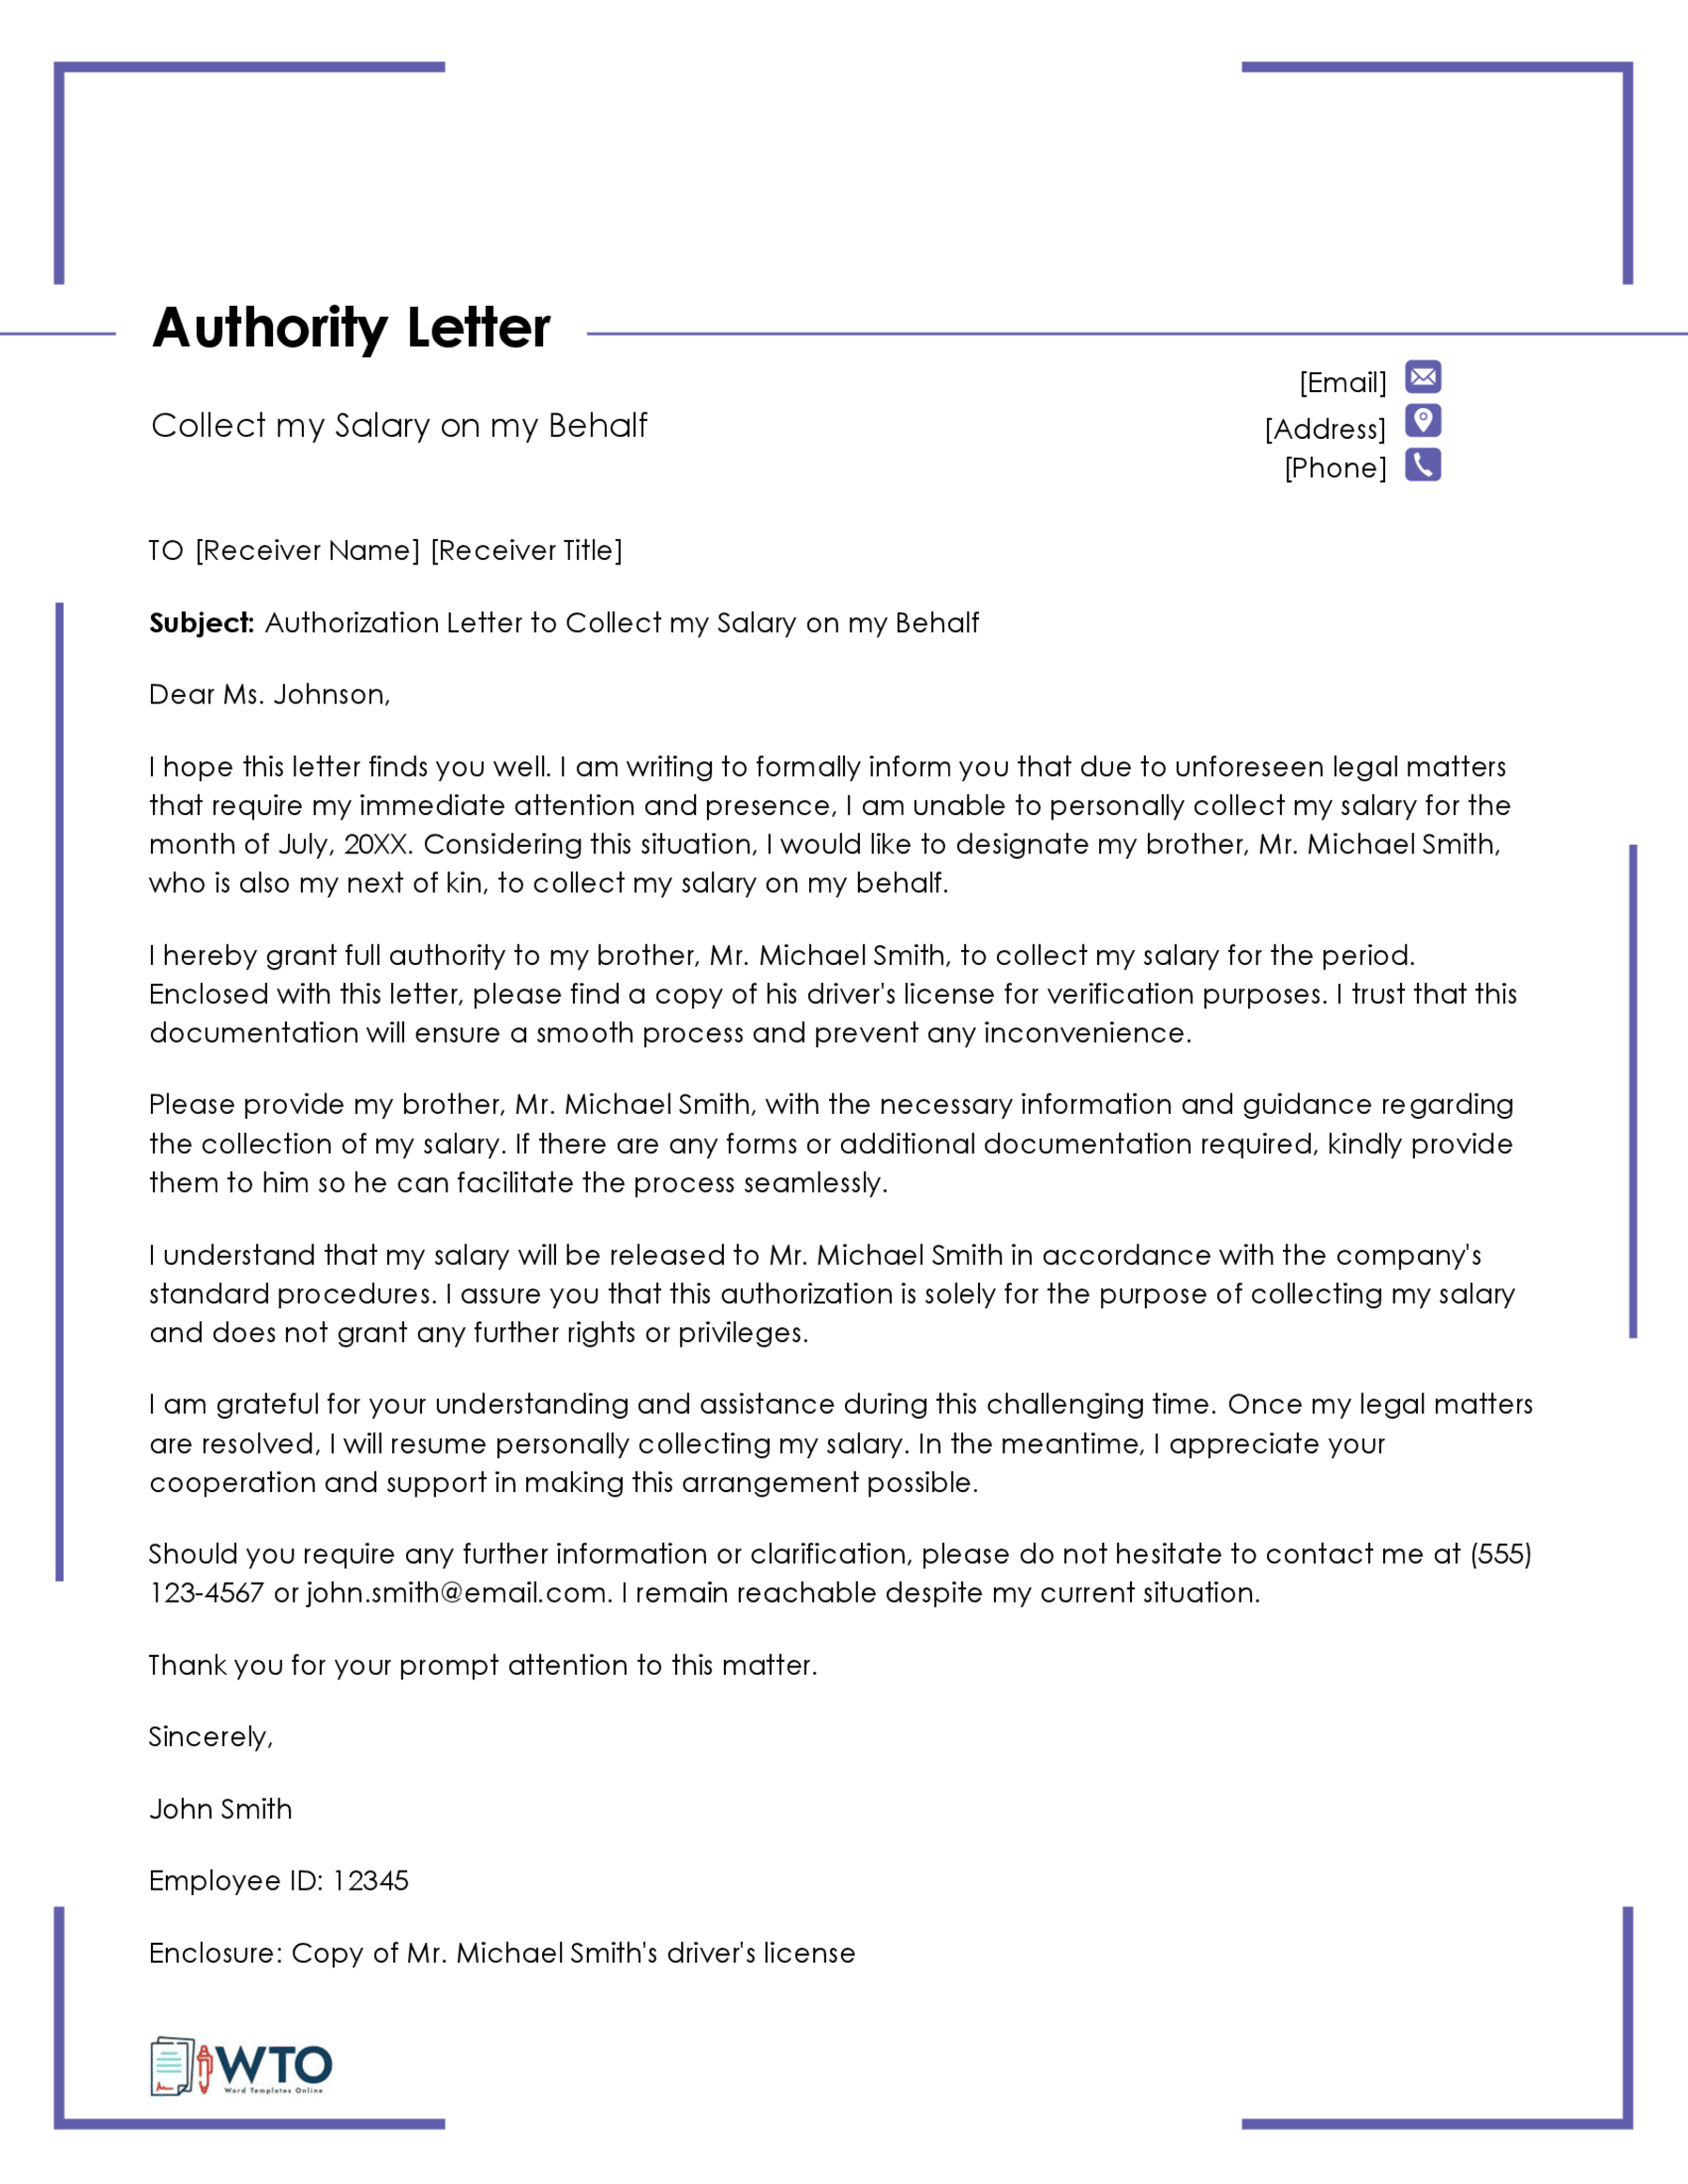 Sample Authorization Letter to Collect Salary-Downloadable word format